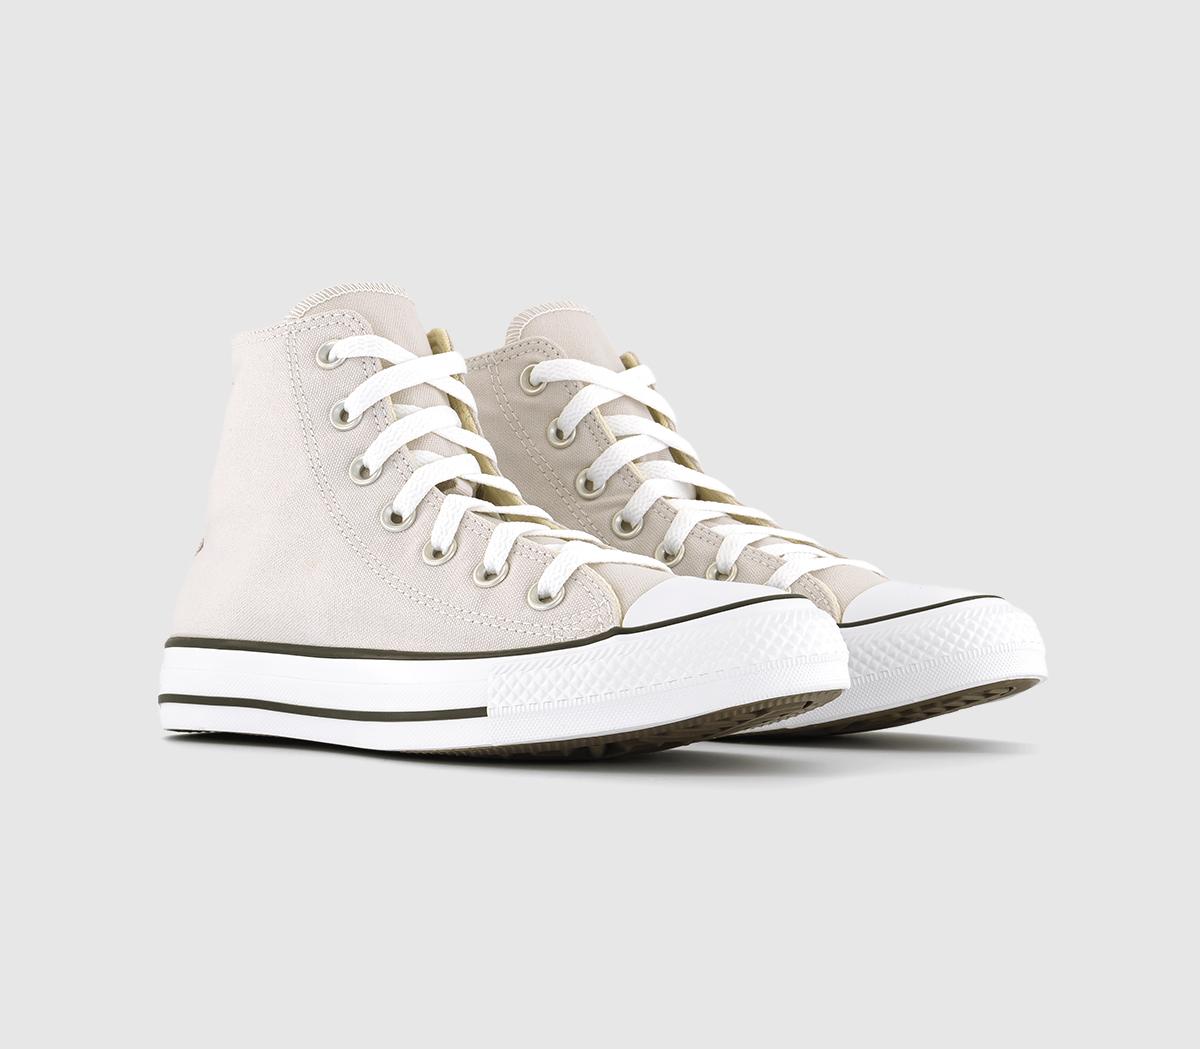 Converse All Star Hi Trainers Pale Putty White Black Natural, 10